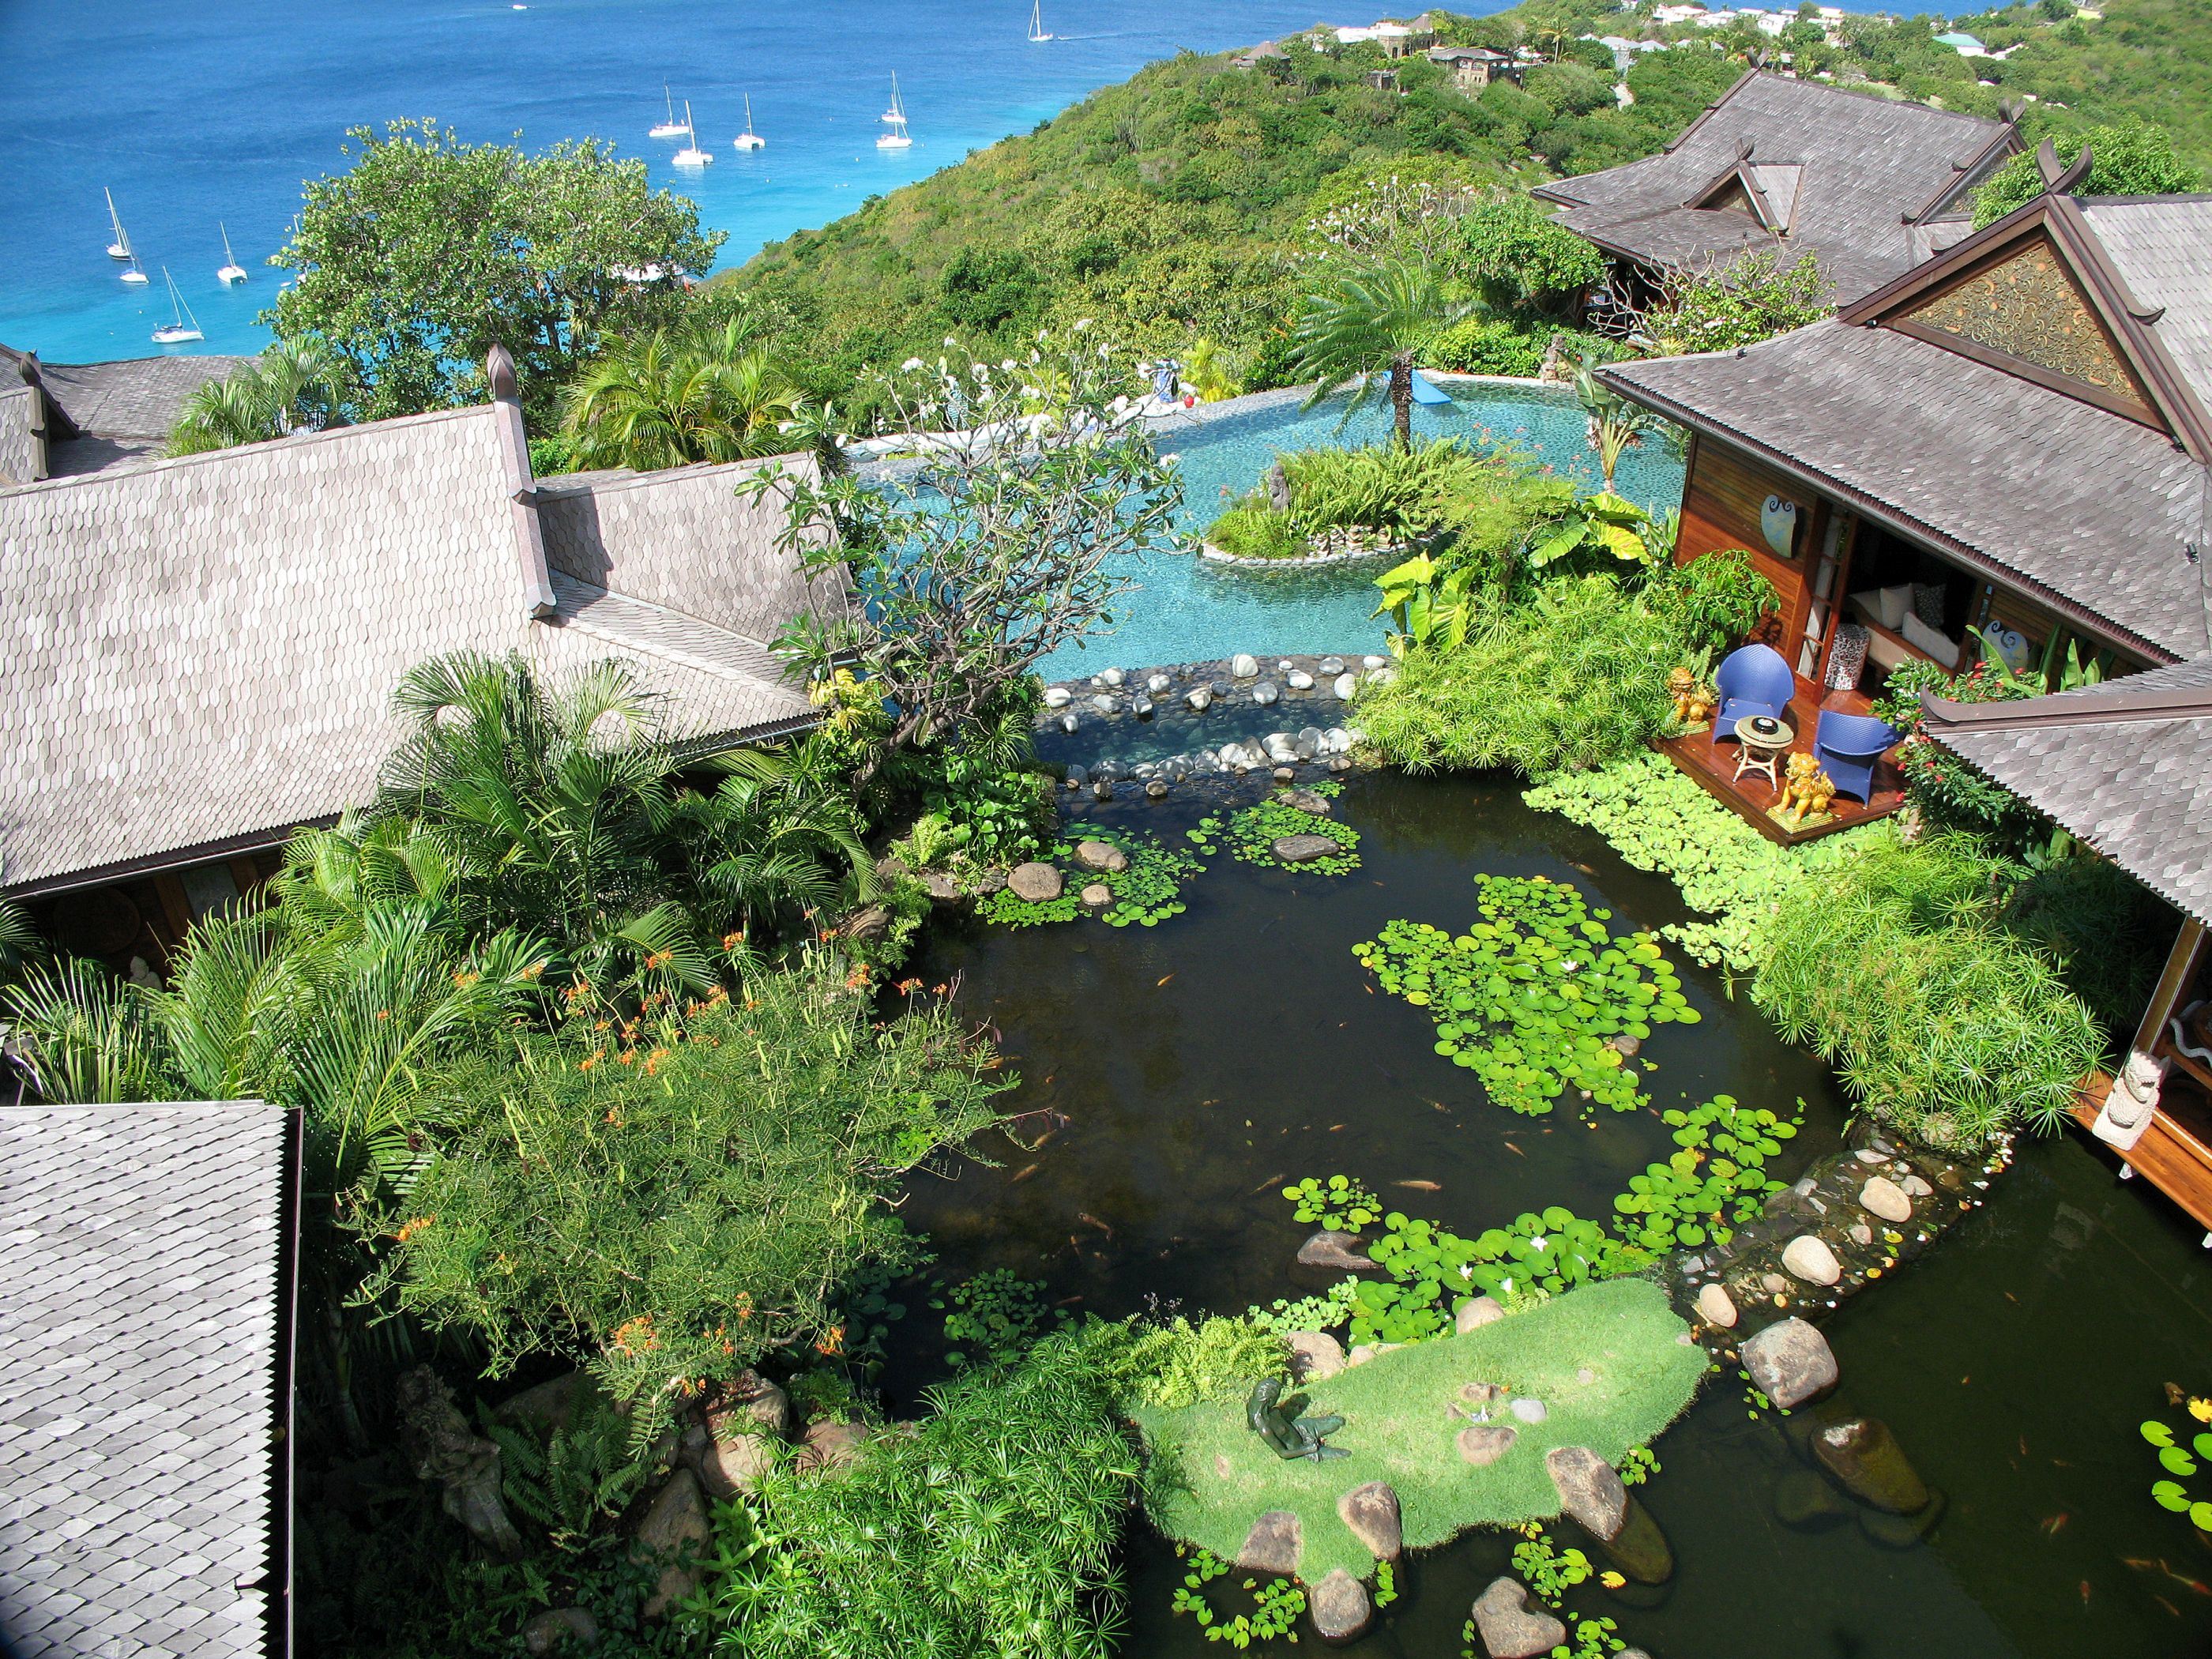 The gardens and house and pond of Ilanga, Mustique